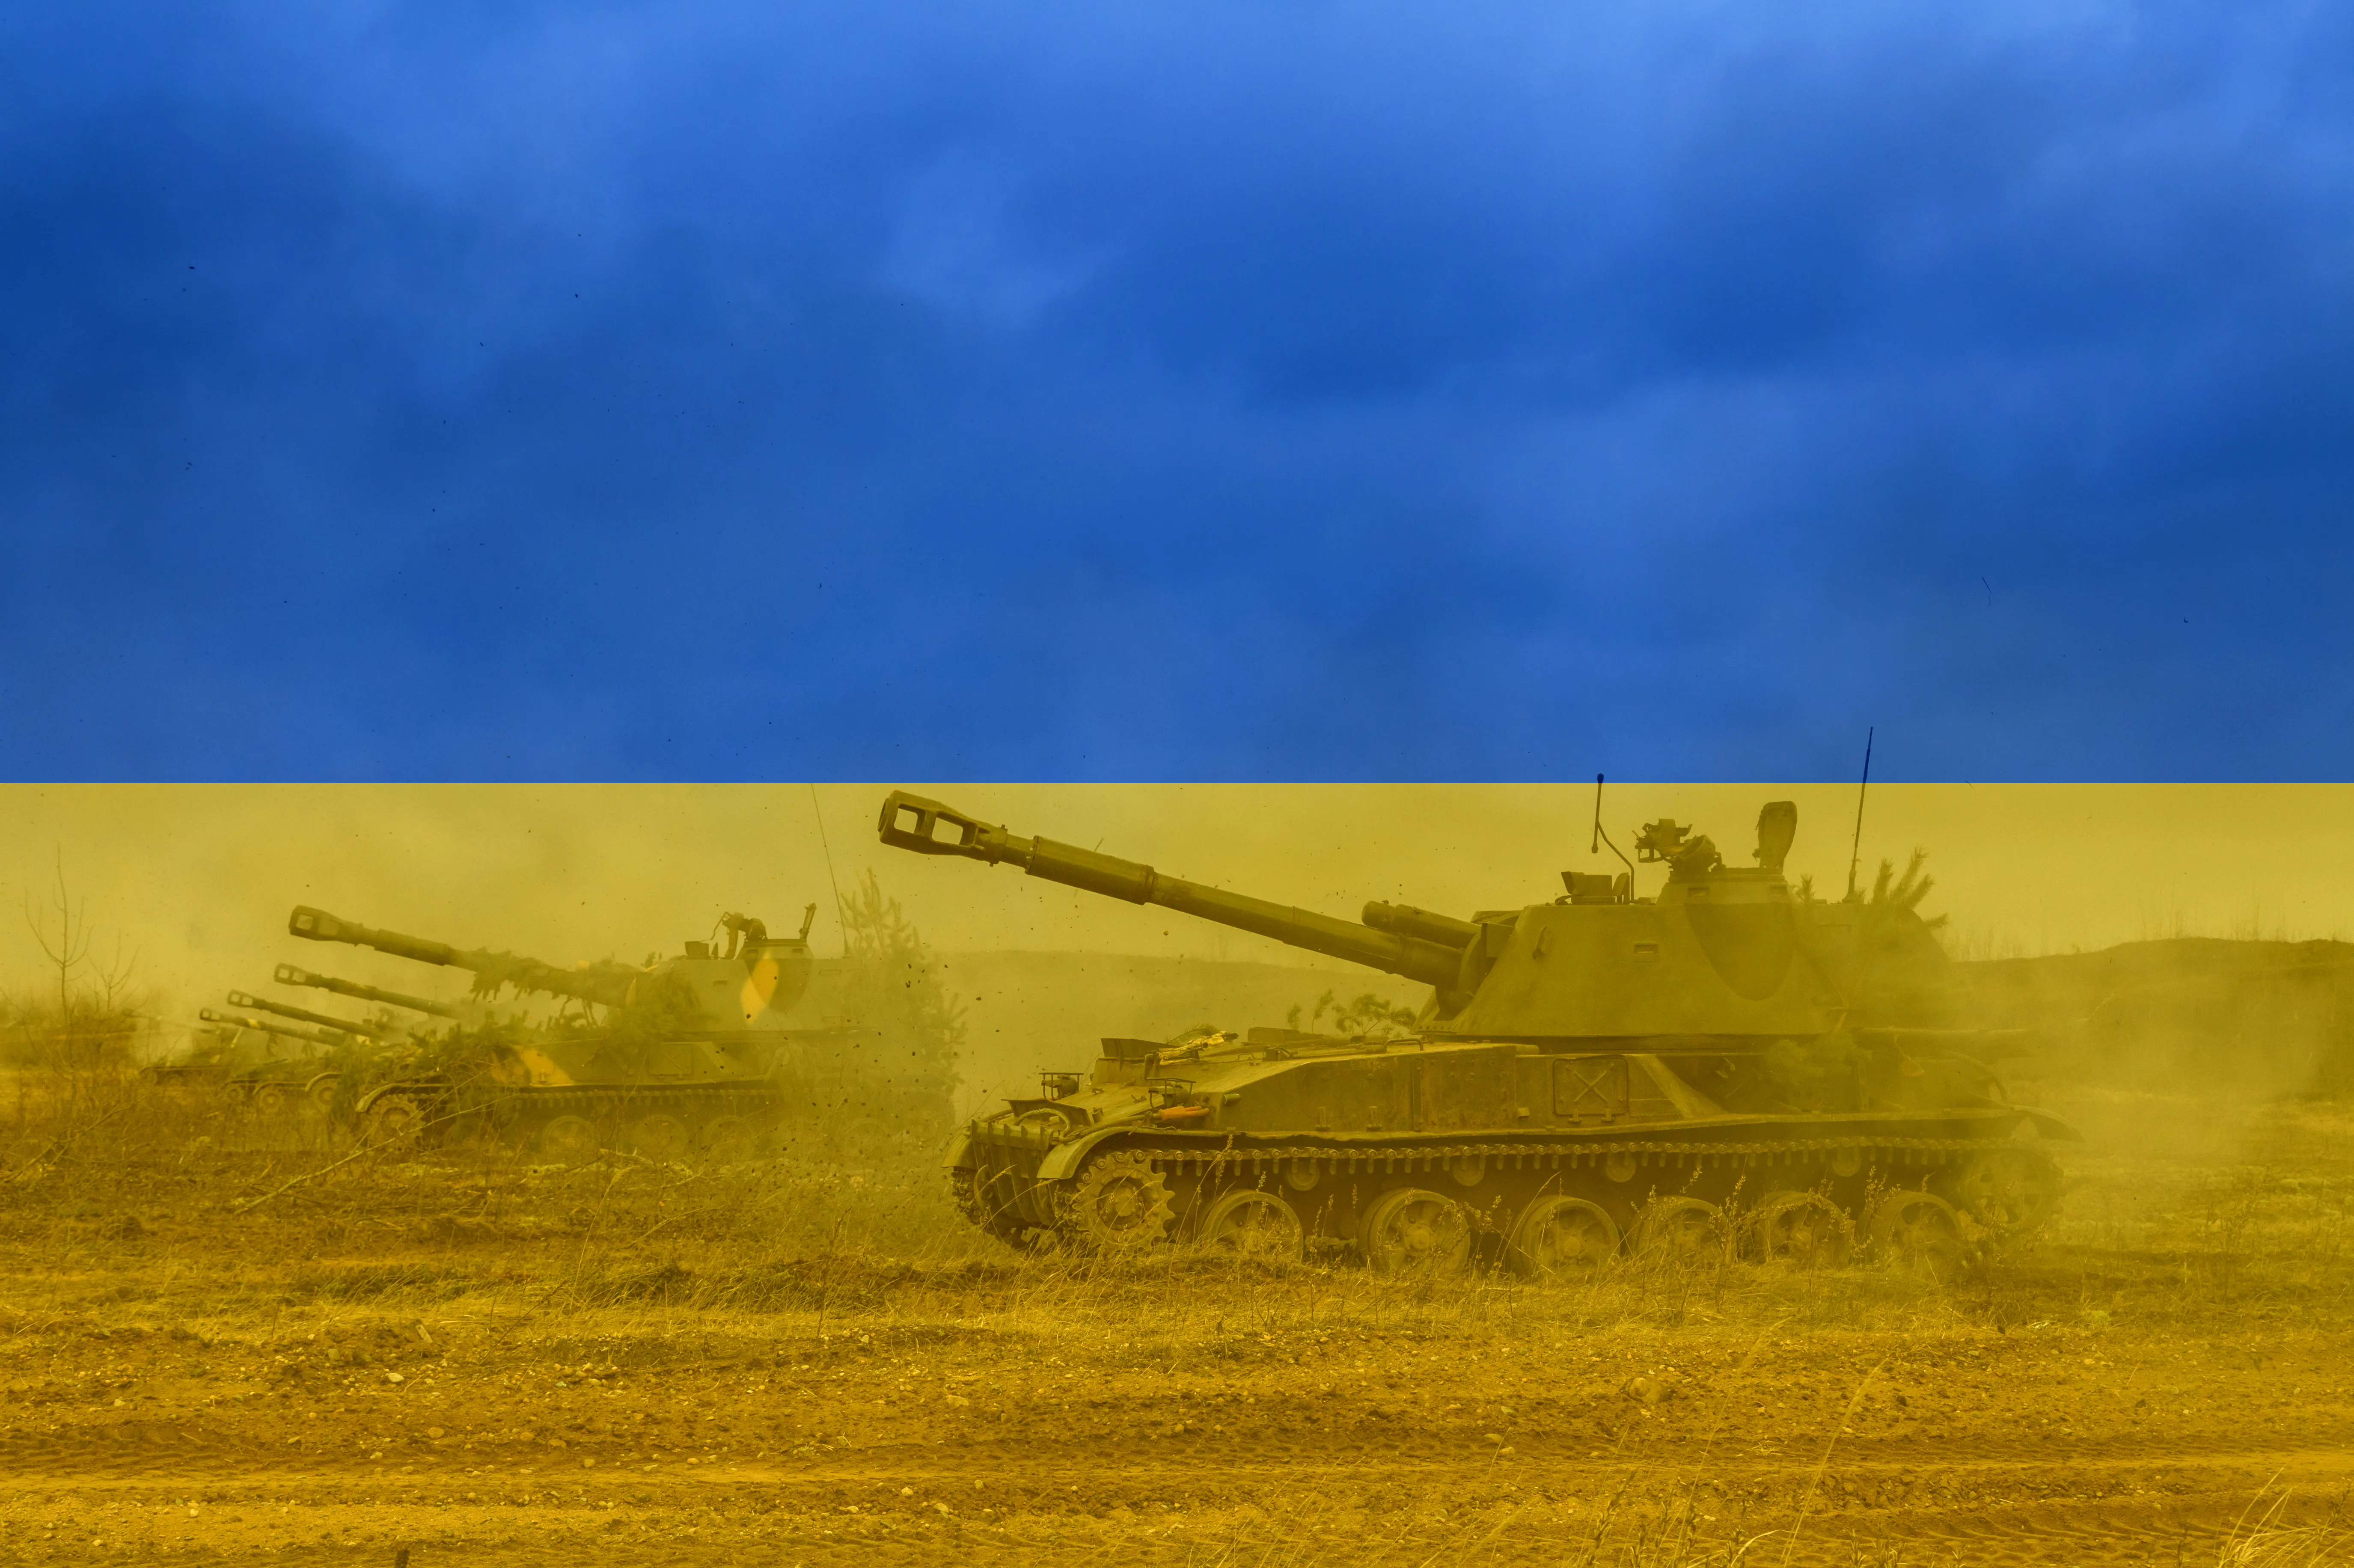 The Russia-Ukraine conflict: A war of attrition